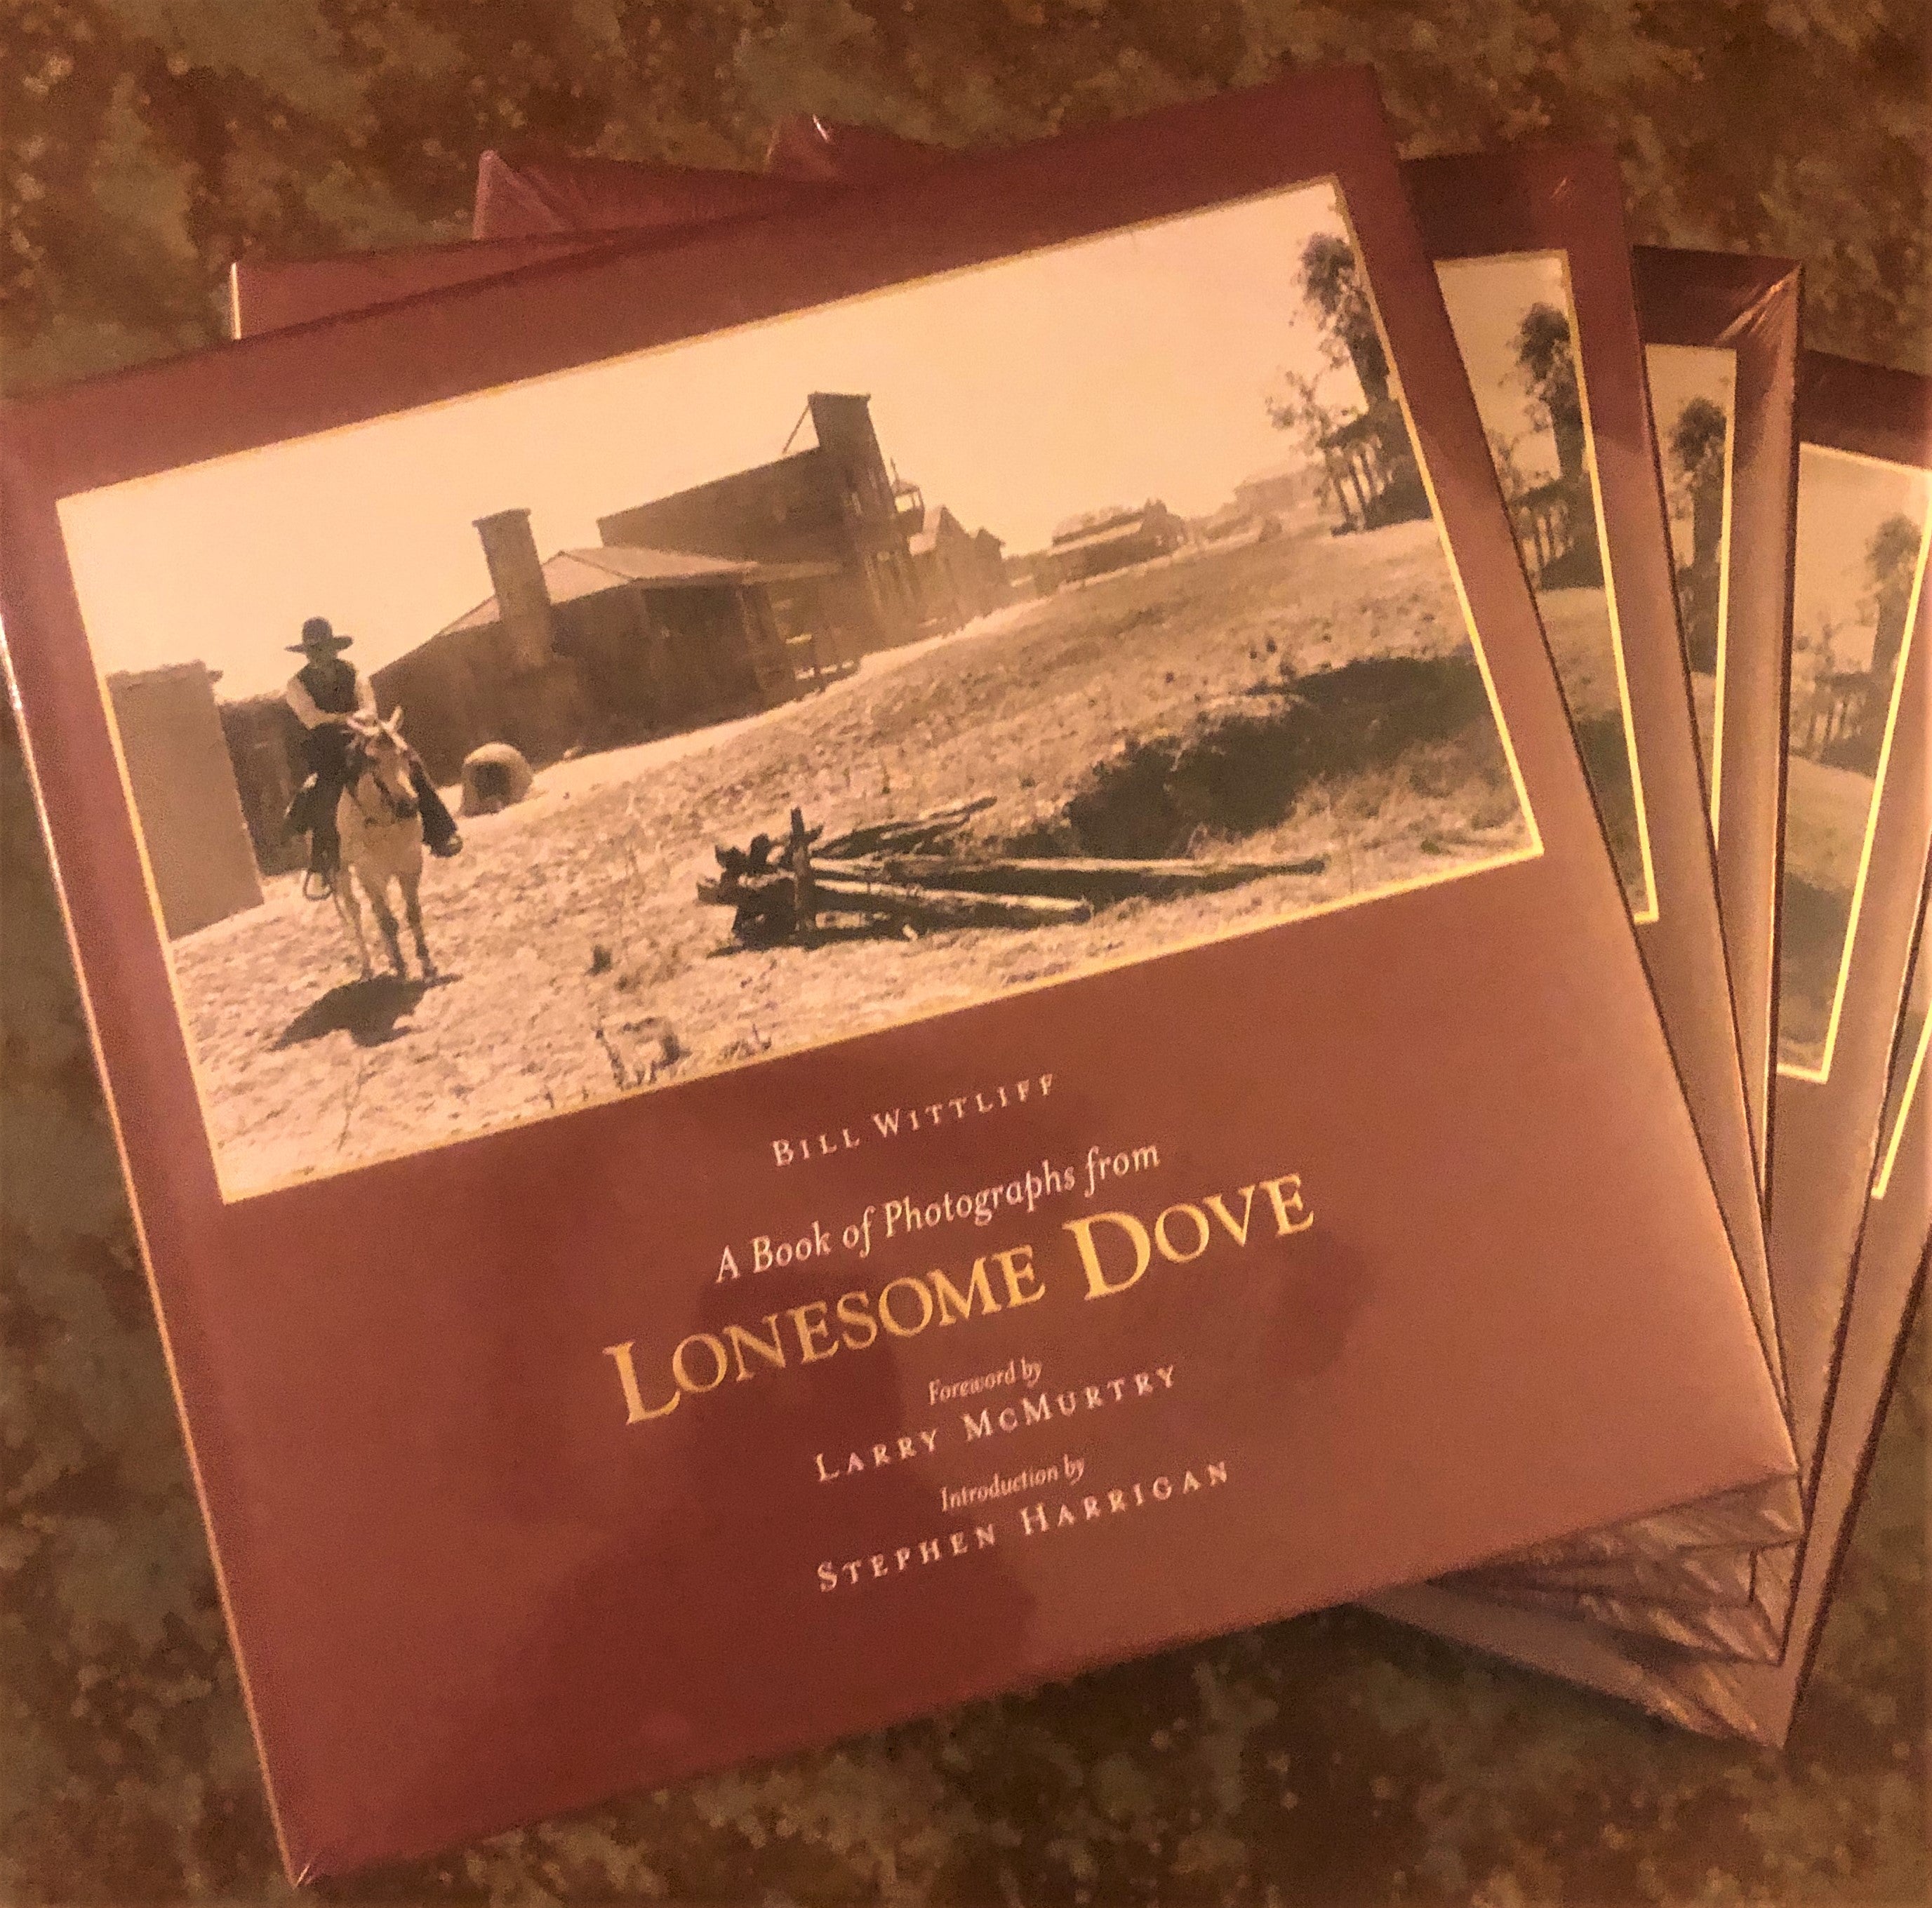 BOOKS - Photographs from Lonesome Dove